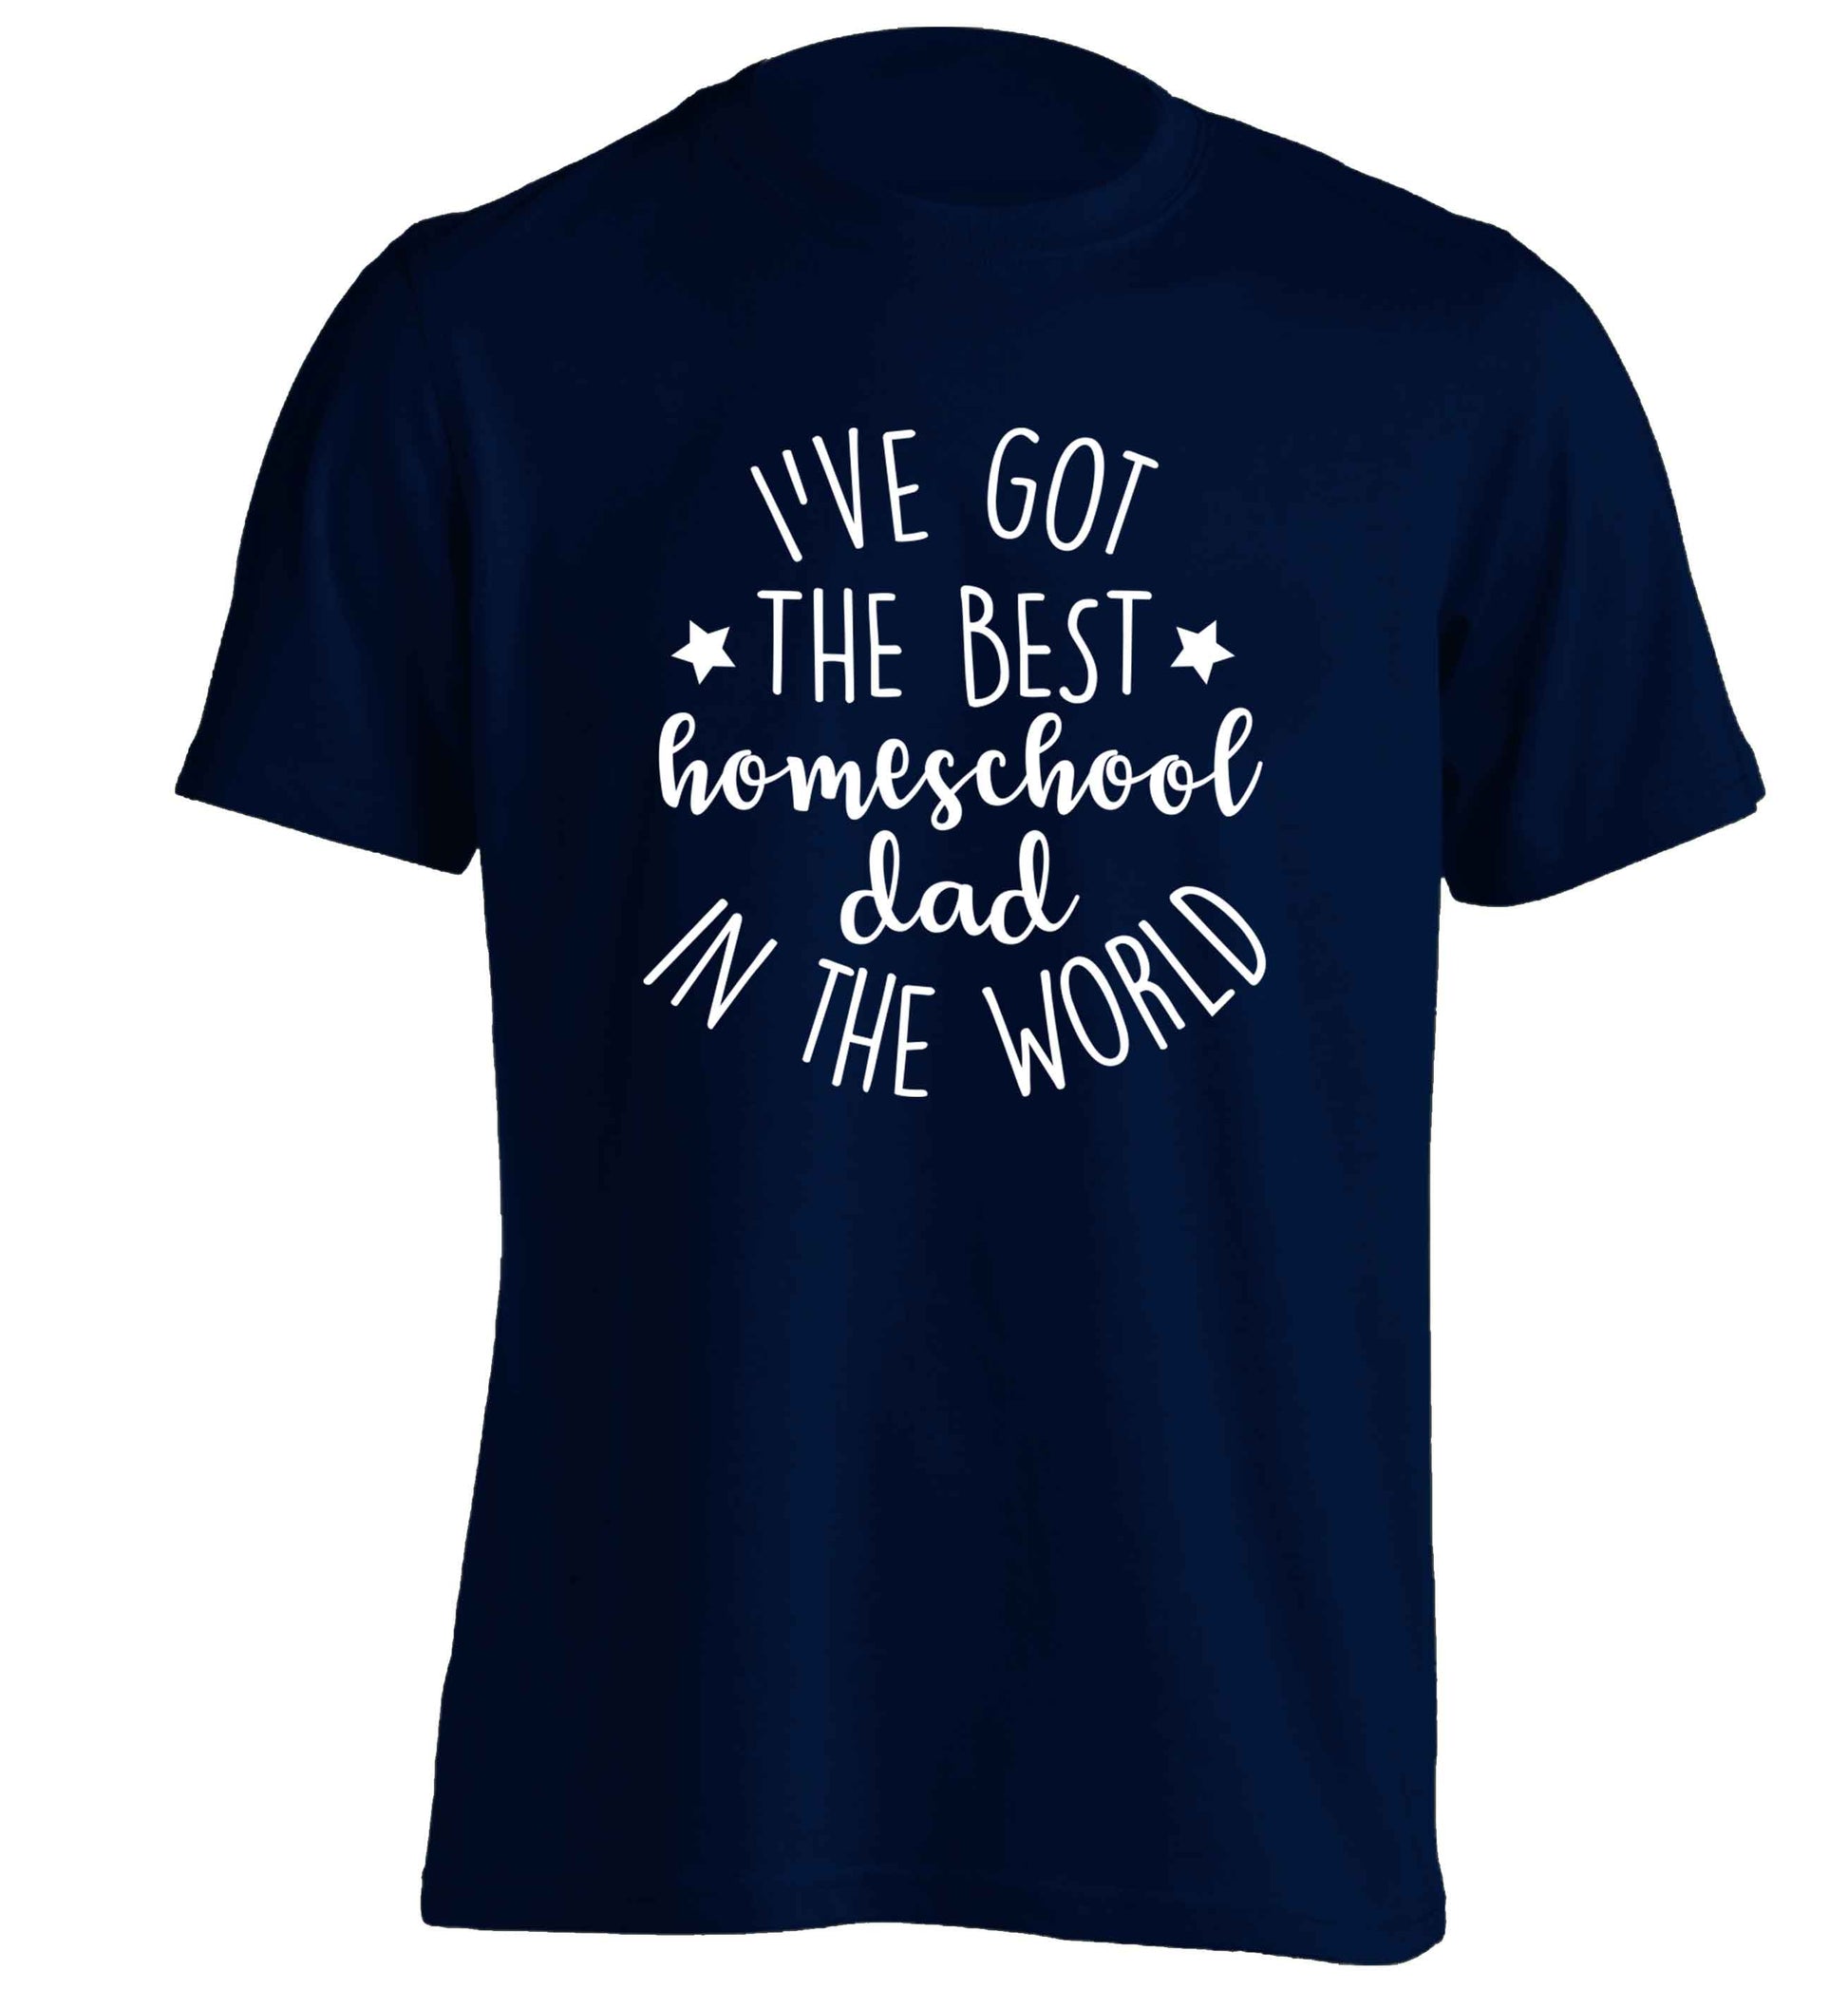 I've got the best homeschool dad in the world adults unisex navy Tshirt 2XL